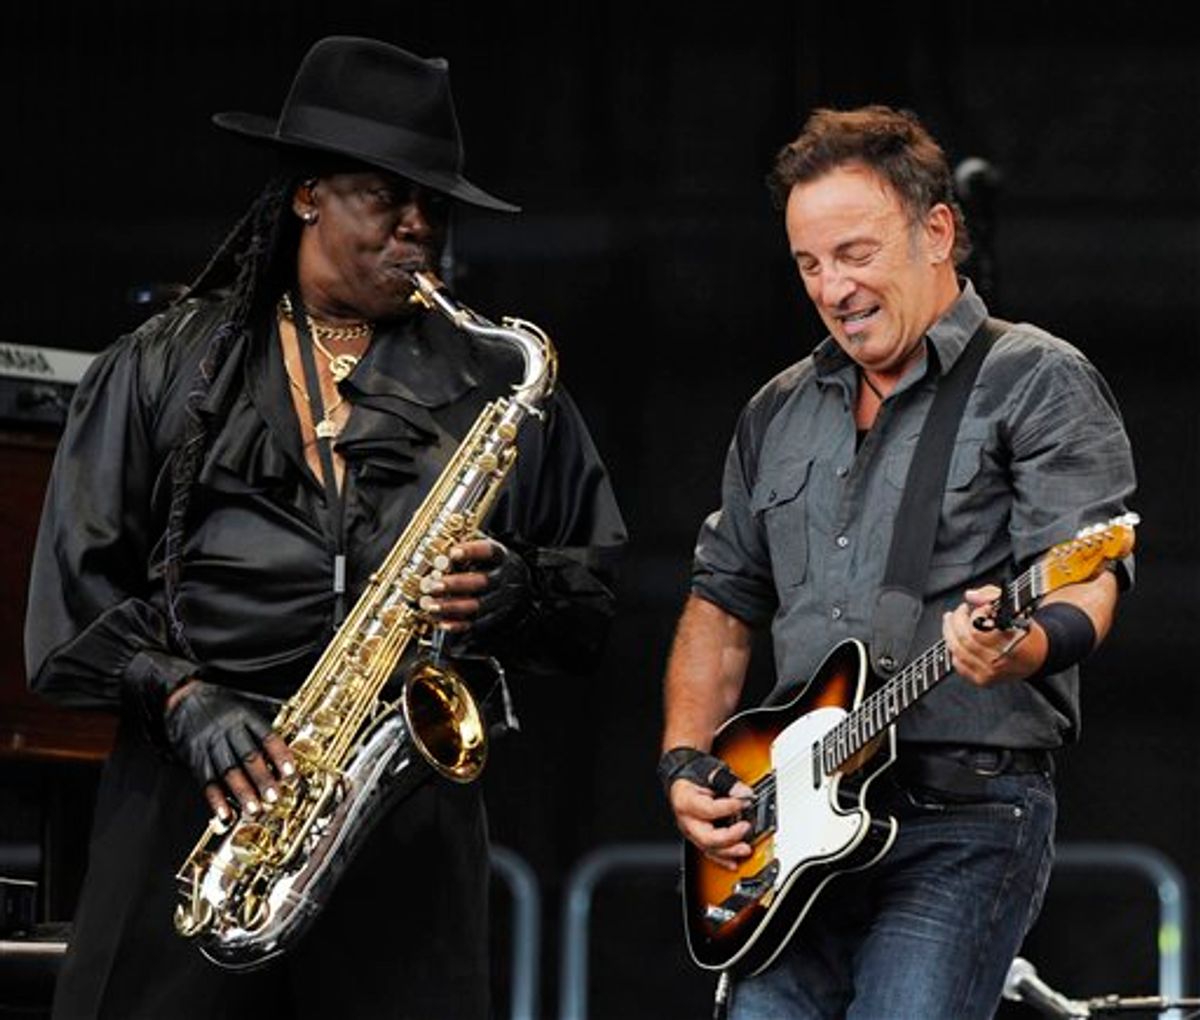 FILE - In this July 2, 2009 file photo, U.S. rock singer Bruce Springsteen, right, and saxophonist Clarence Clemons  perform during the first German concert of his "Working On A Dream" European tour in the Olympic stadium in Munich, Germany.  A person who has worked with Clemons in the past confirmed Sunday night, June 12, 2011 that Clemons has suffered a stroke. (AP Photo/Christof Stache, File) (AP)